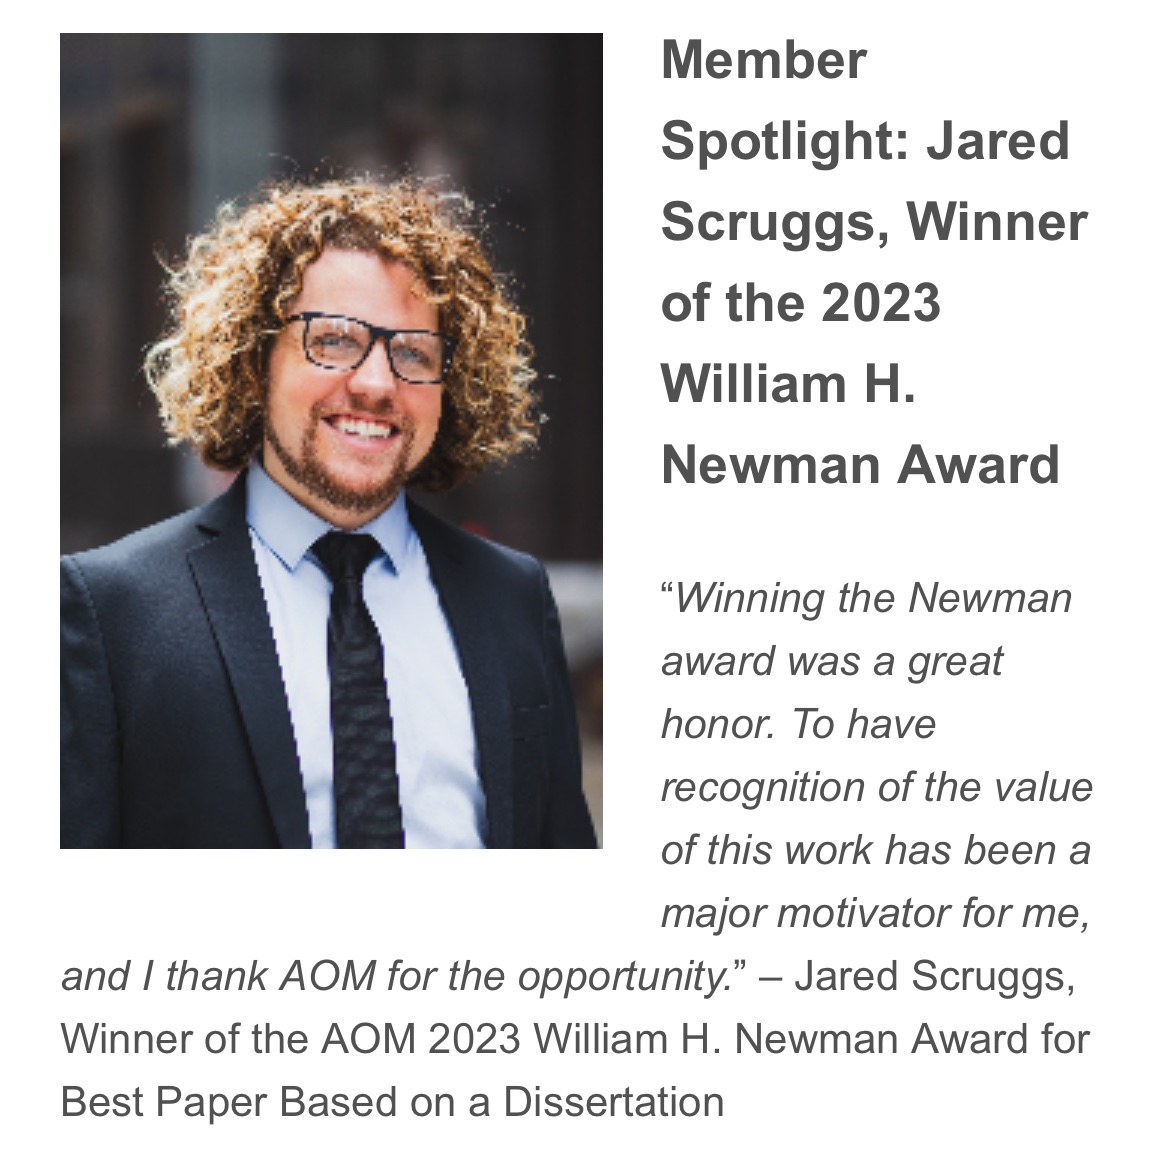 You know how you sometimes meet people and you don’t know them very well but you just want the best for them and see them shine?! @JaredPScruggs is one of those people. Congratulations on winning the Academy of Management Newman Award for Best Paper based on a Dissertation (!!!!)